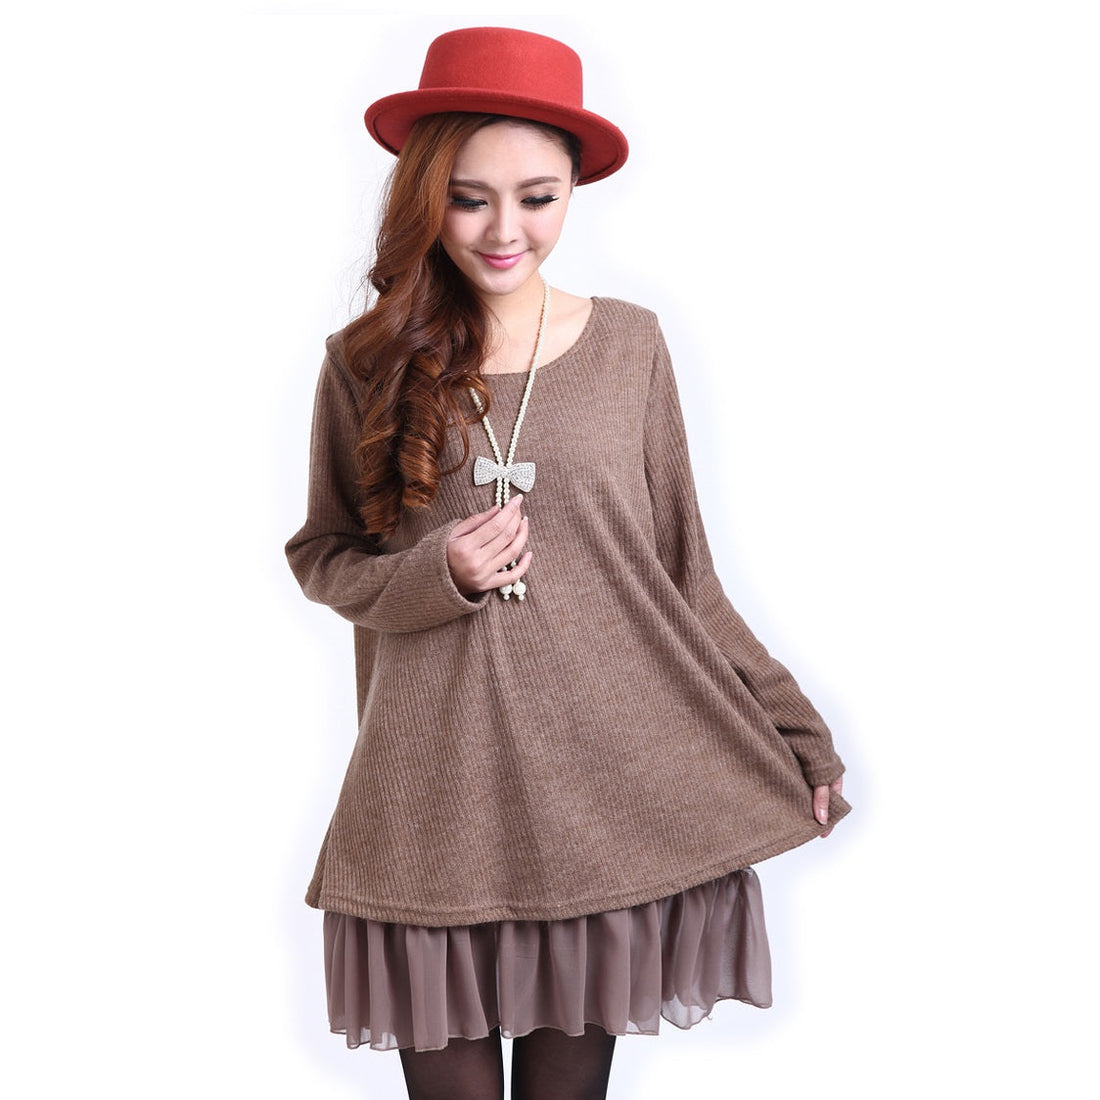 Women's Spring/Autumn Casual Long-Sleeved Ruffled Blouse